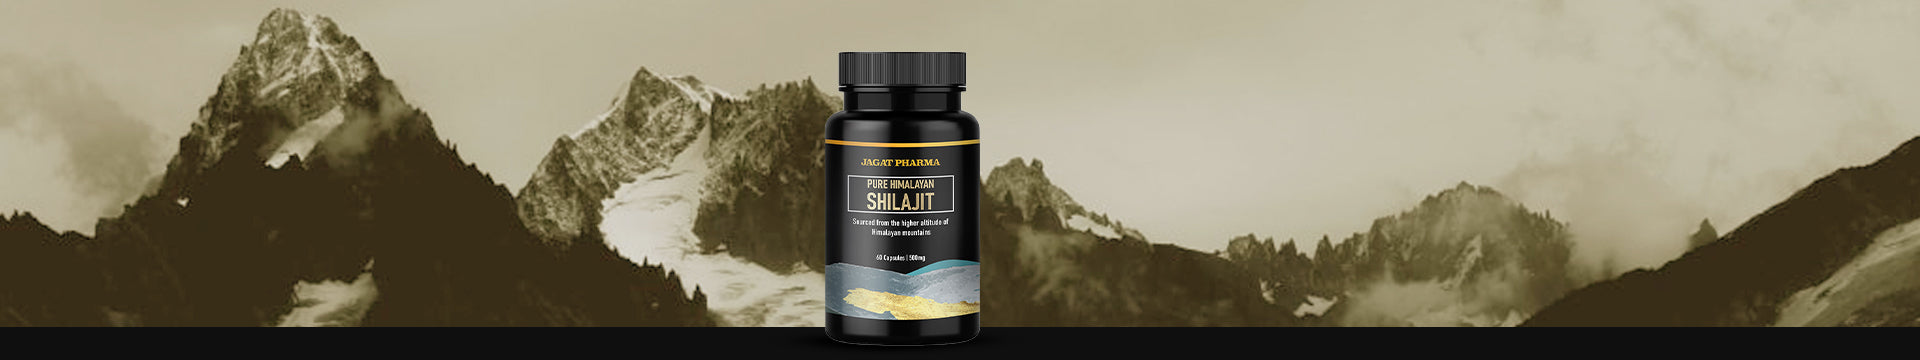 10 Shilajit Benefits for Men to Improve their Health